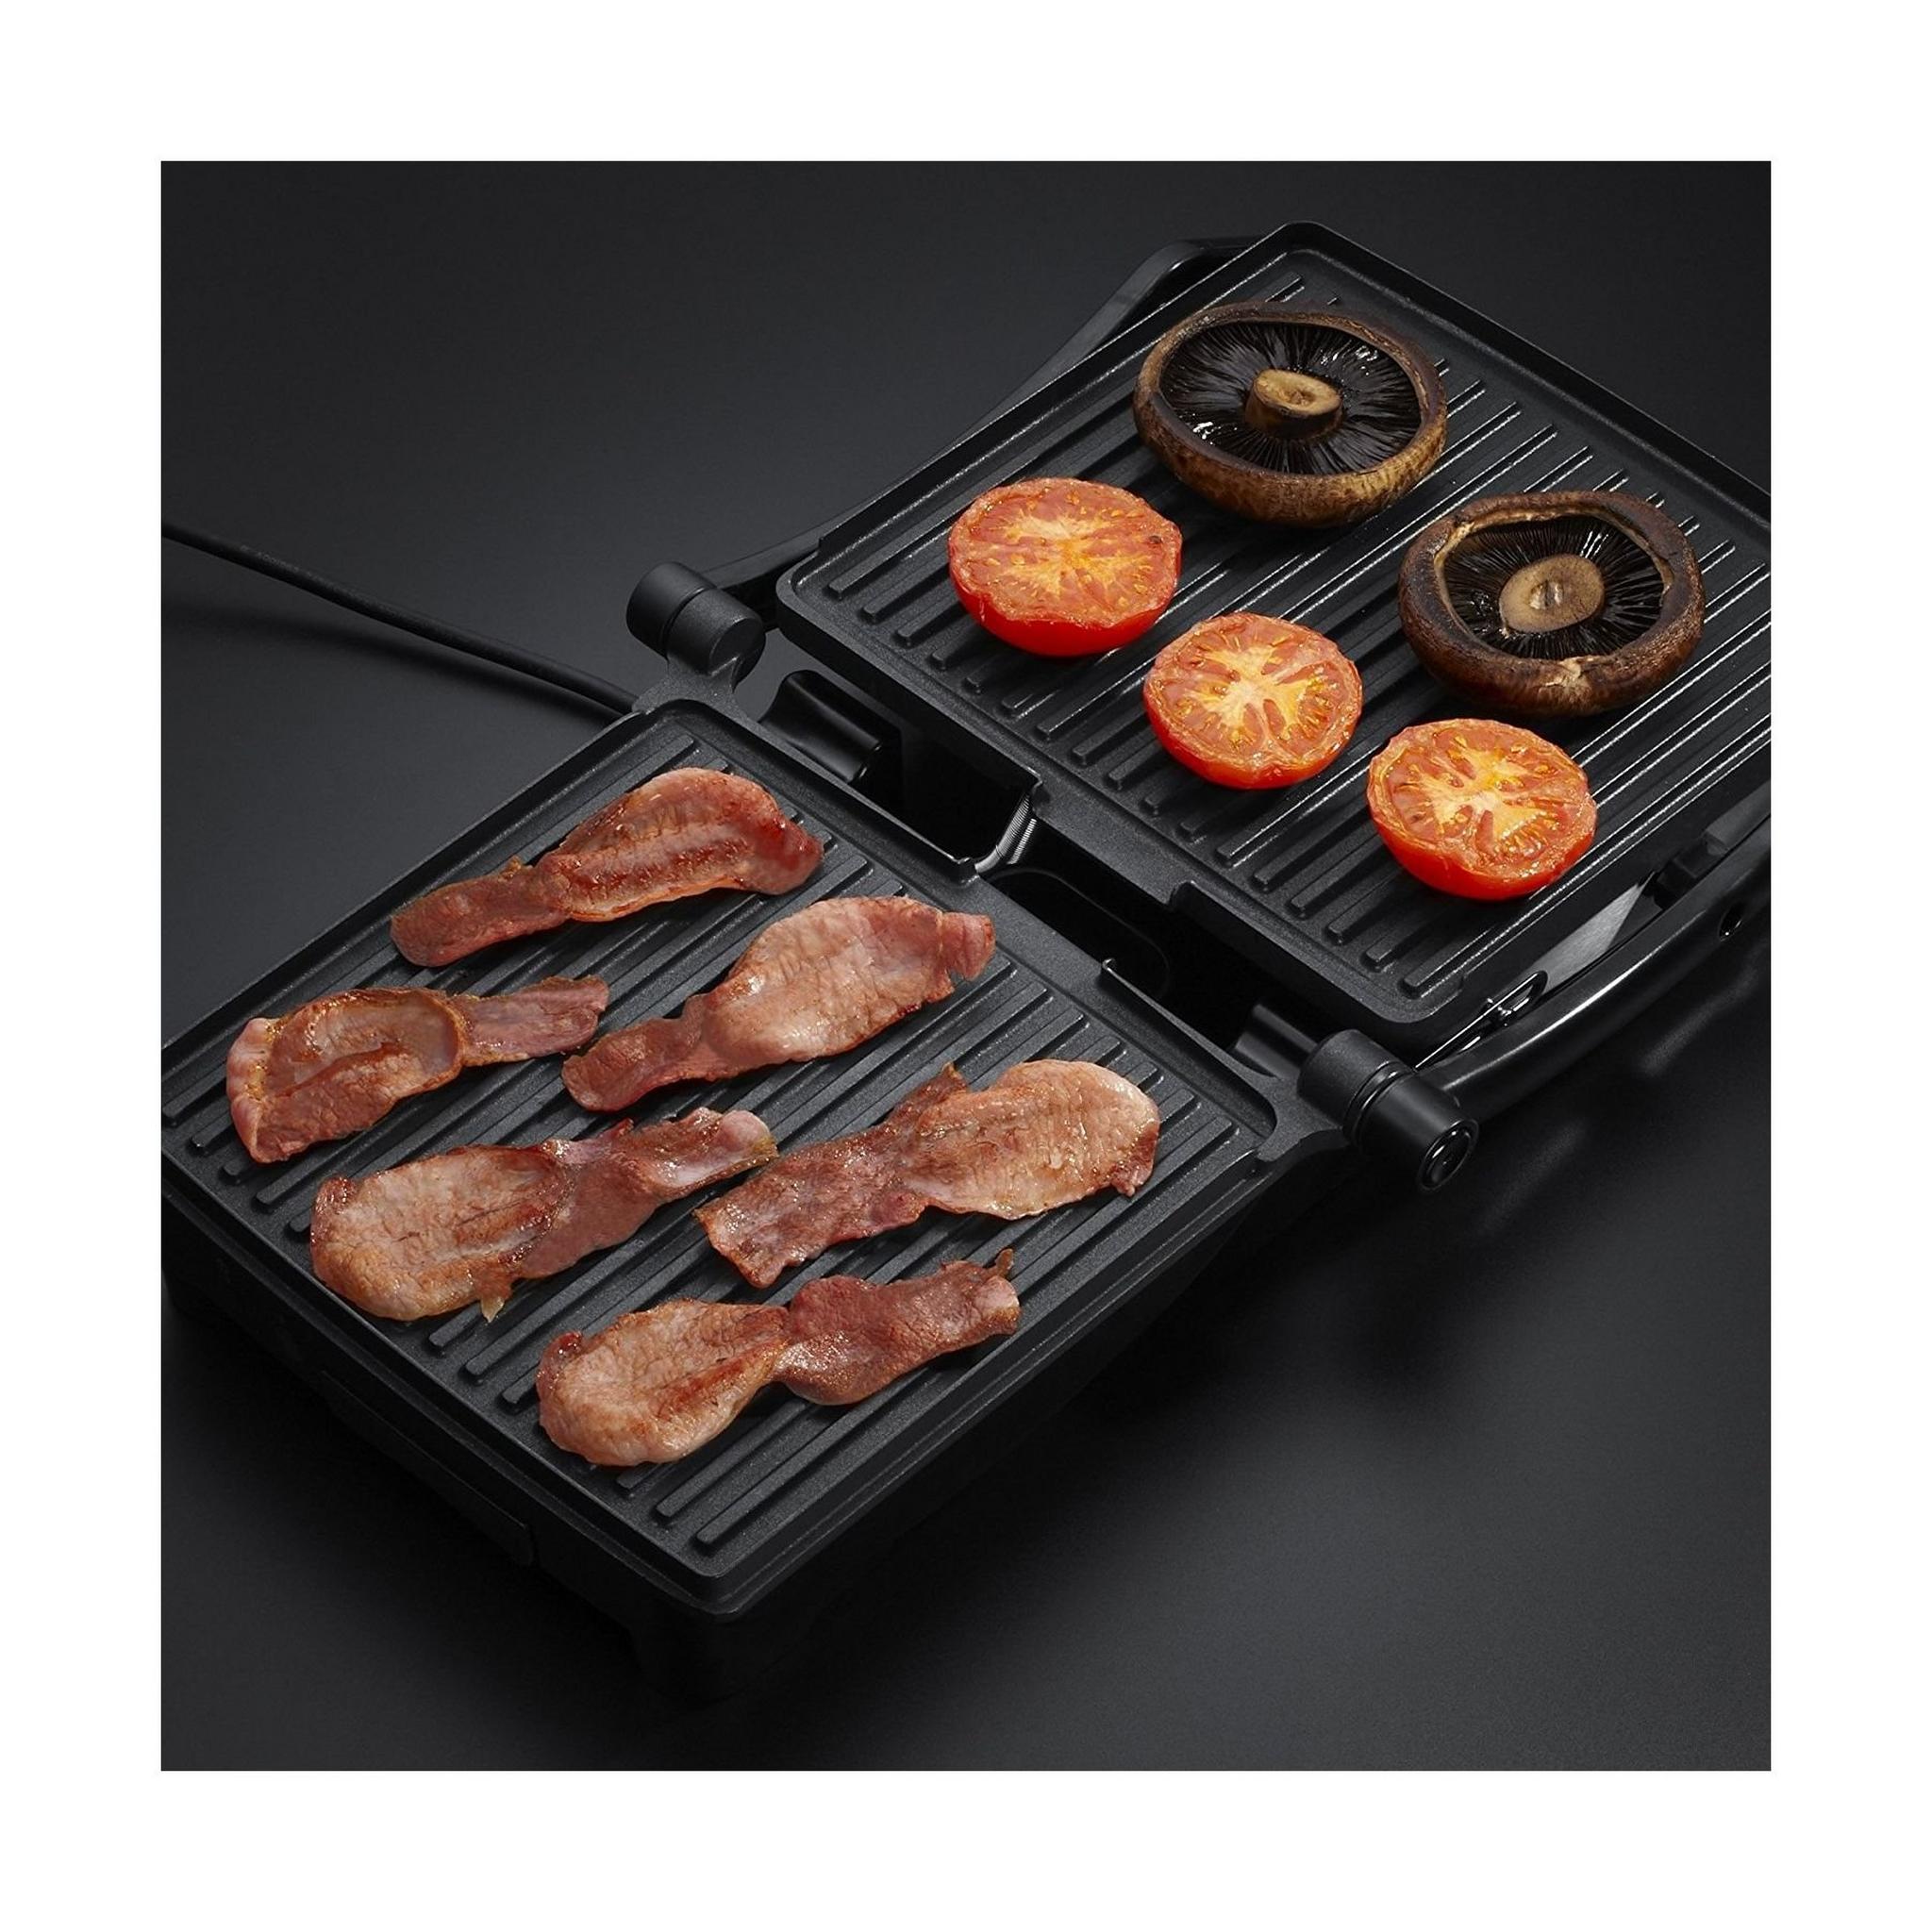 Russell Hobbs 3 In 1 Grill, 1800 Watts, 17888 - Silver/Black